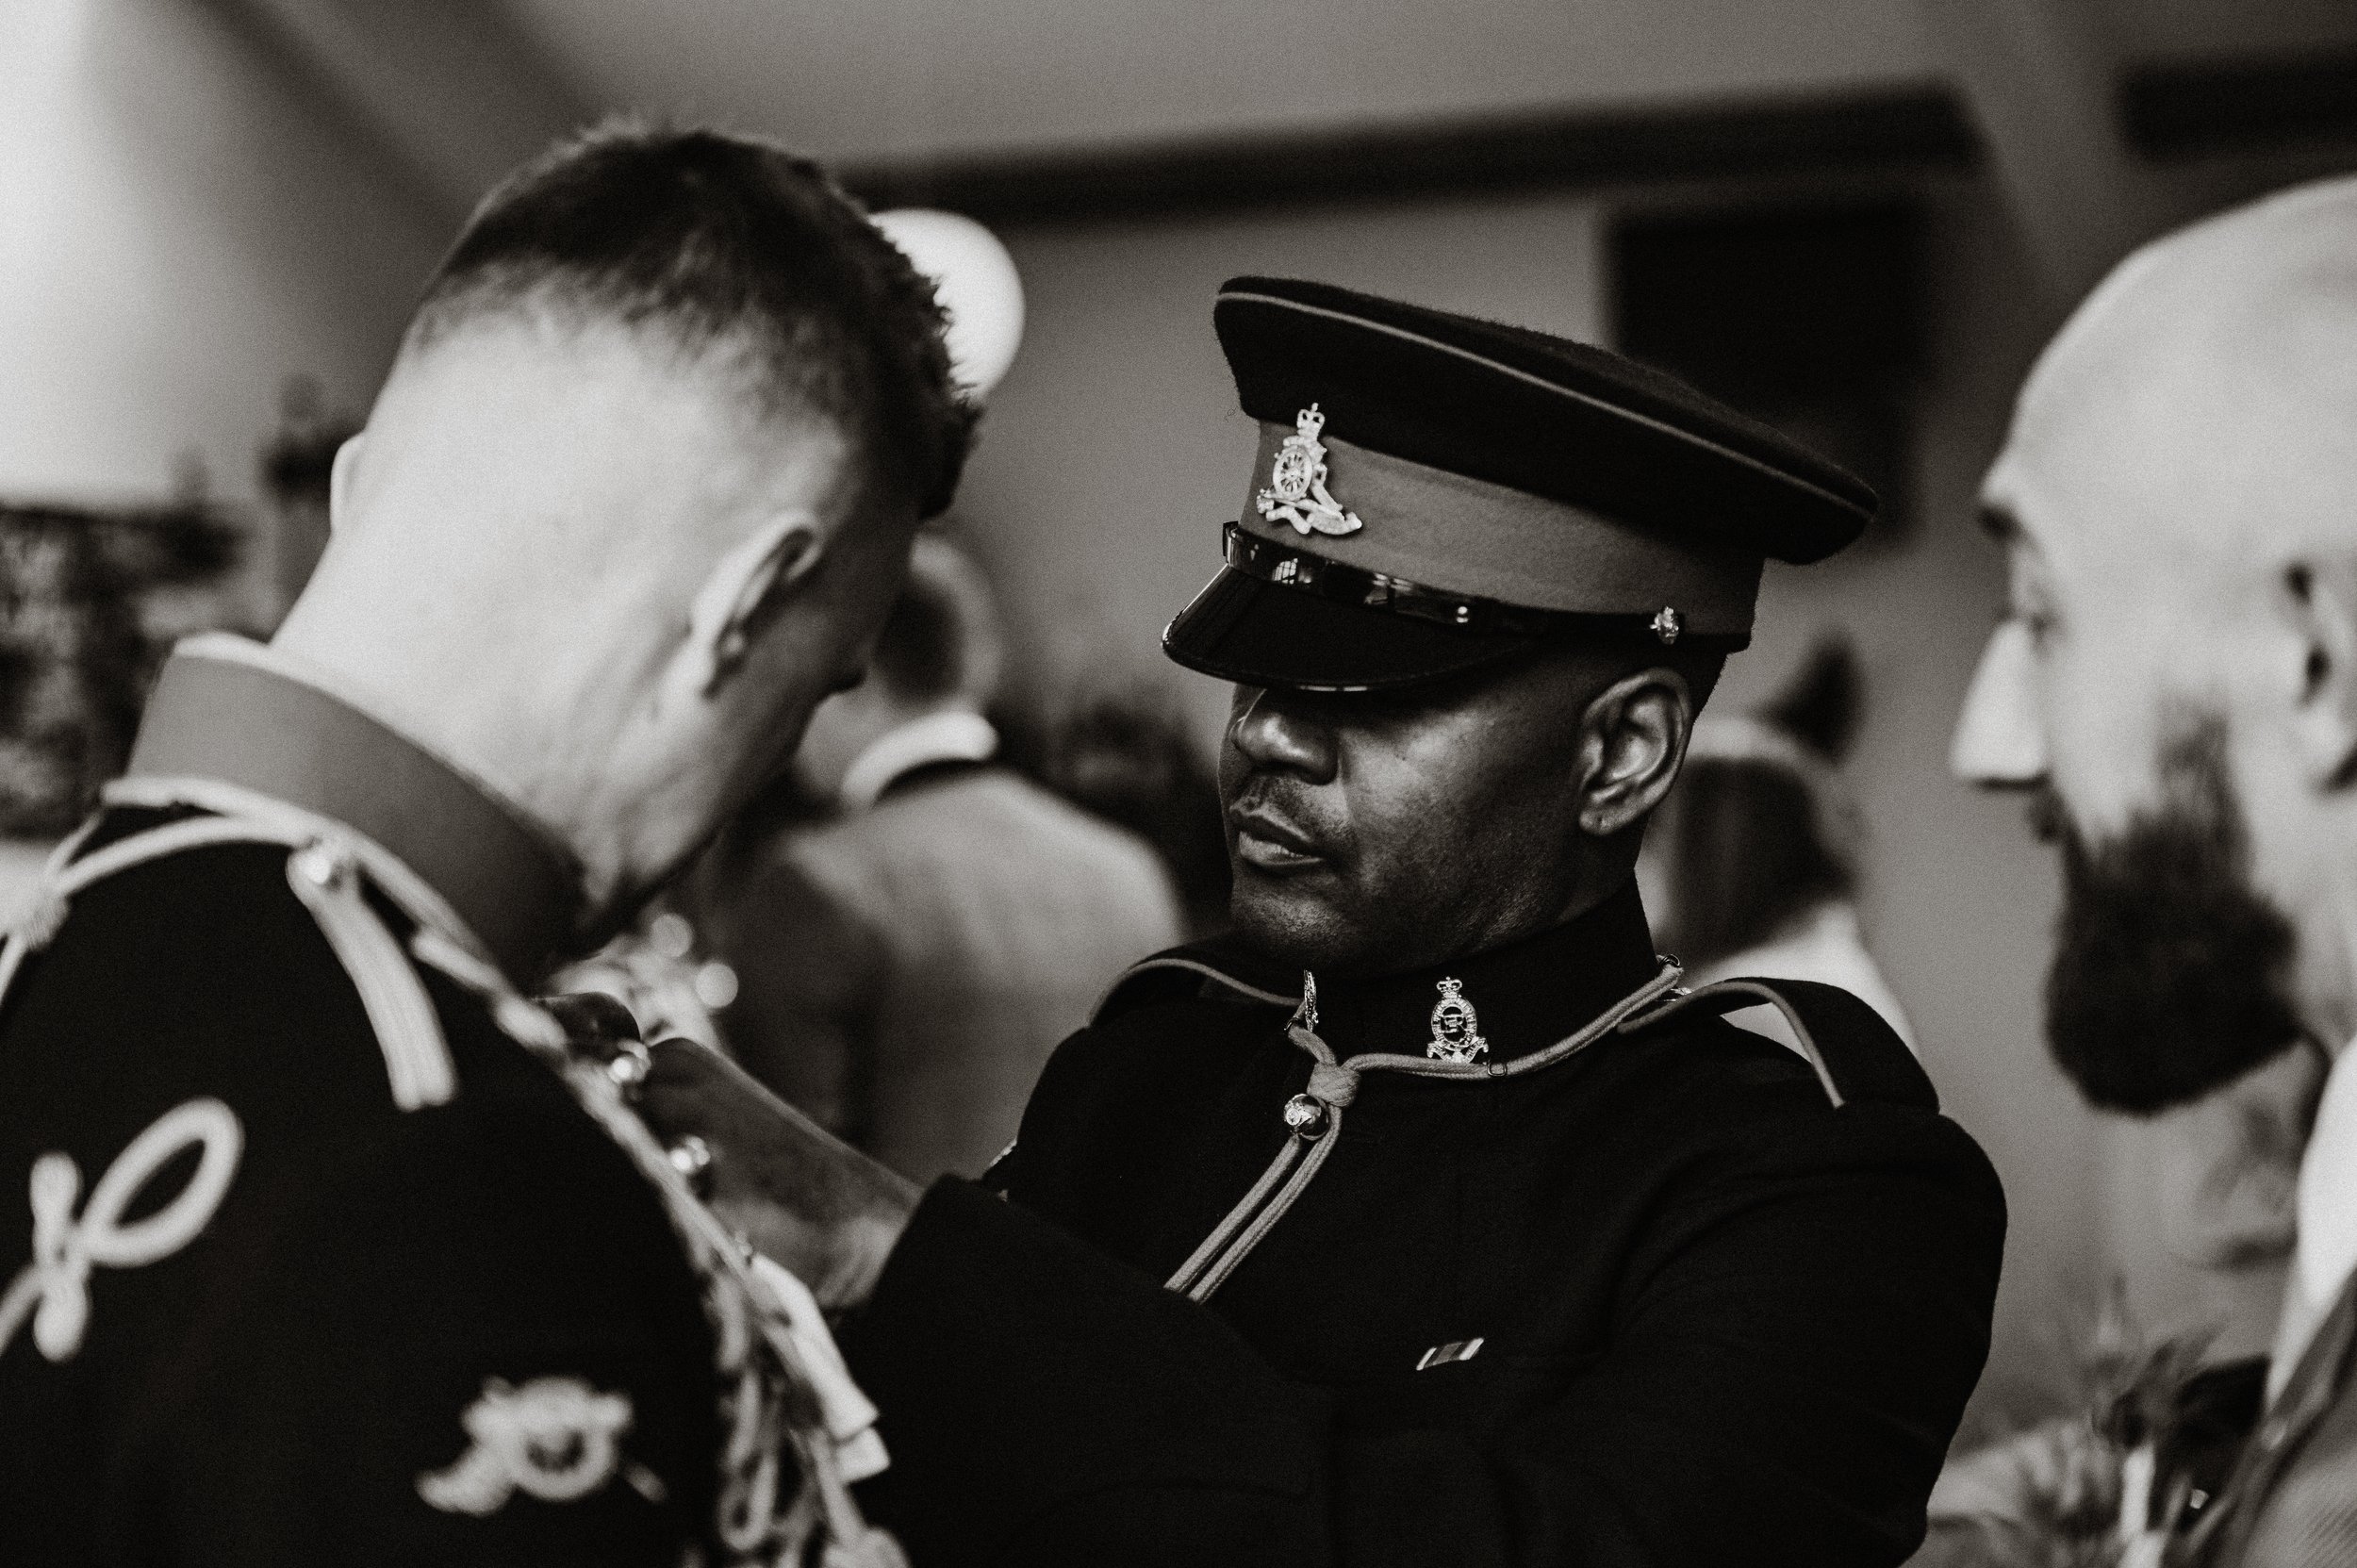 The groom is given some expert assistance with his button hole by a master tailor in full uniform.